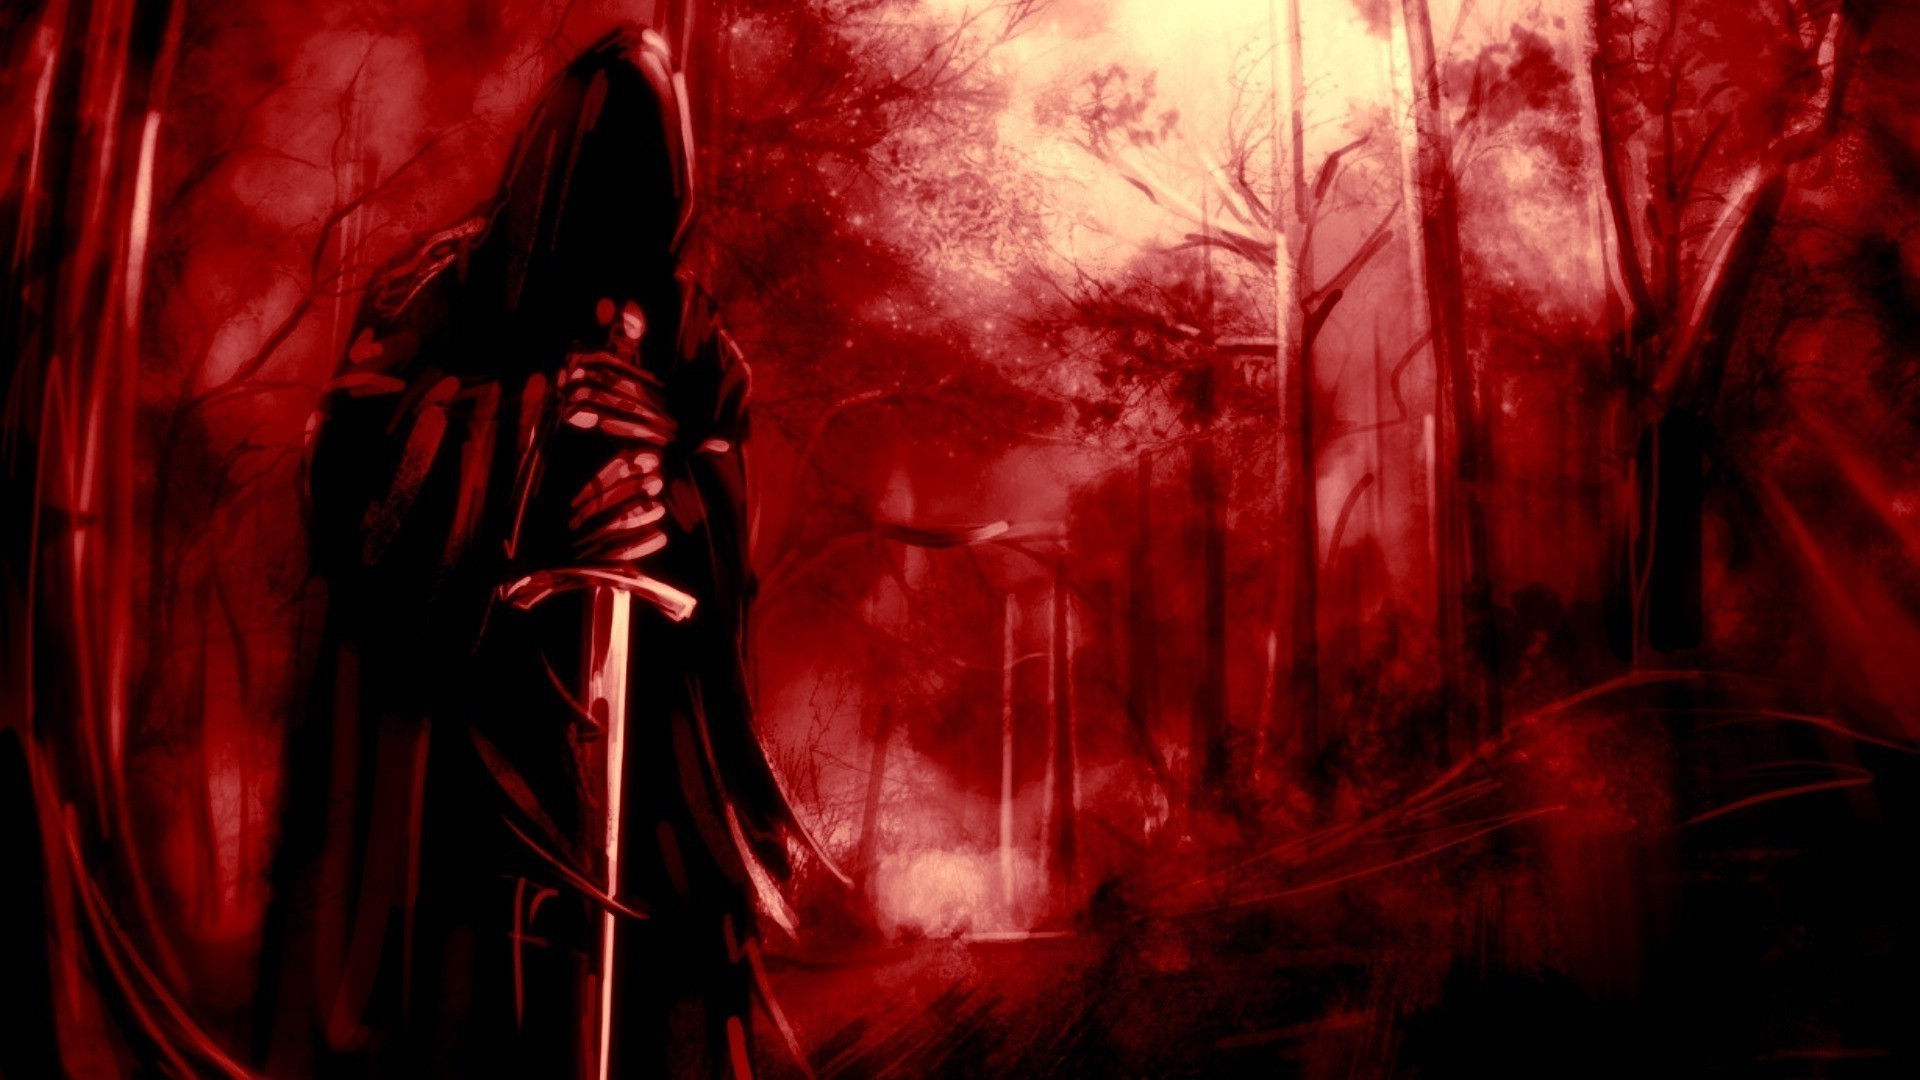 1920x1080, The Lord Of The Rings, Nazgã»l Wallpapers - Evil Imagery - HD Wallpaper 